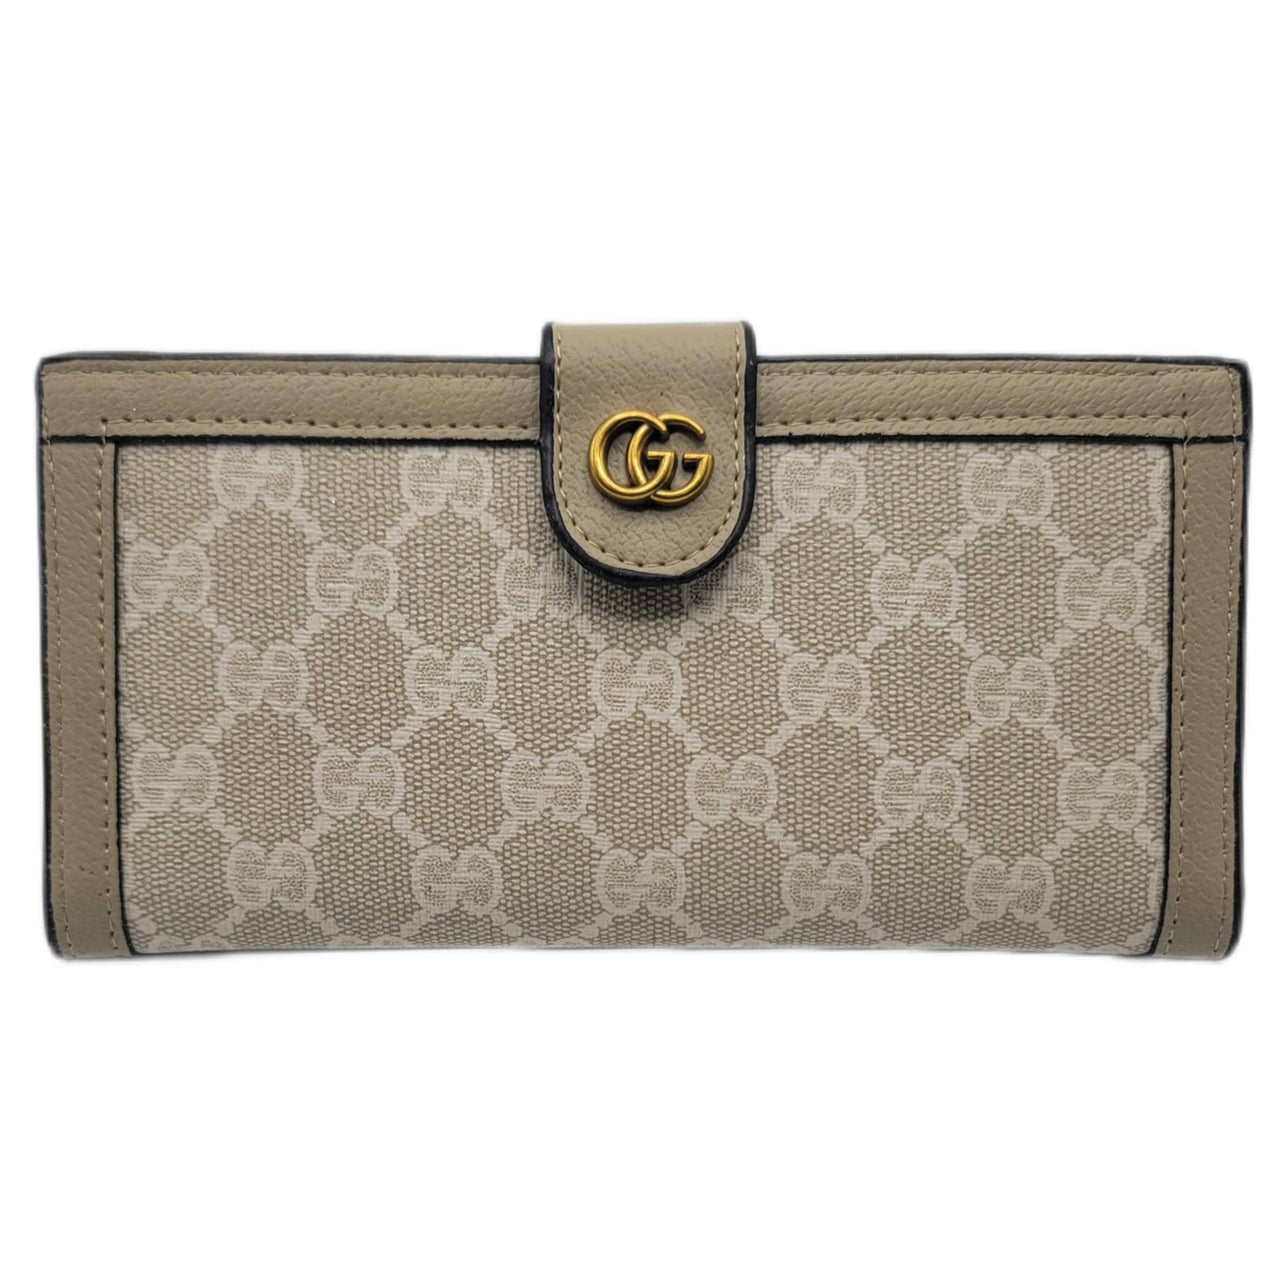 The Bag Couture Luggage & Bags Gucci 3 Fold Wallet Beige Up